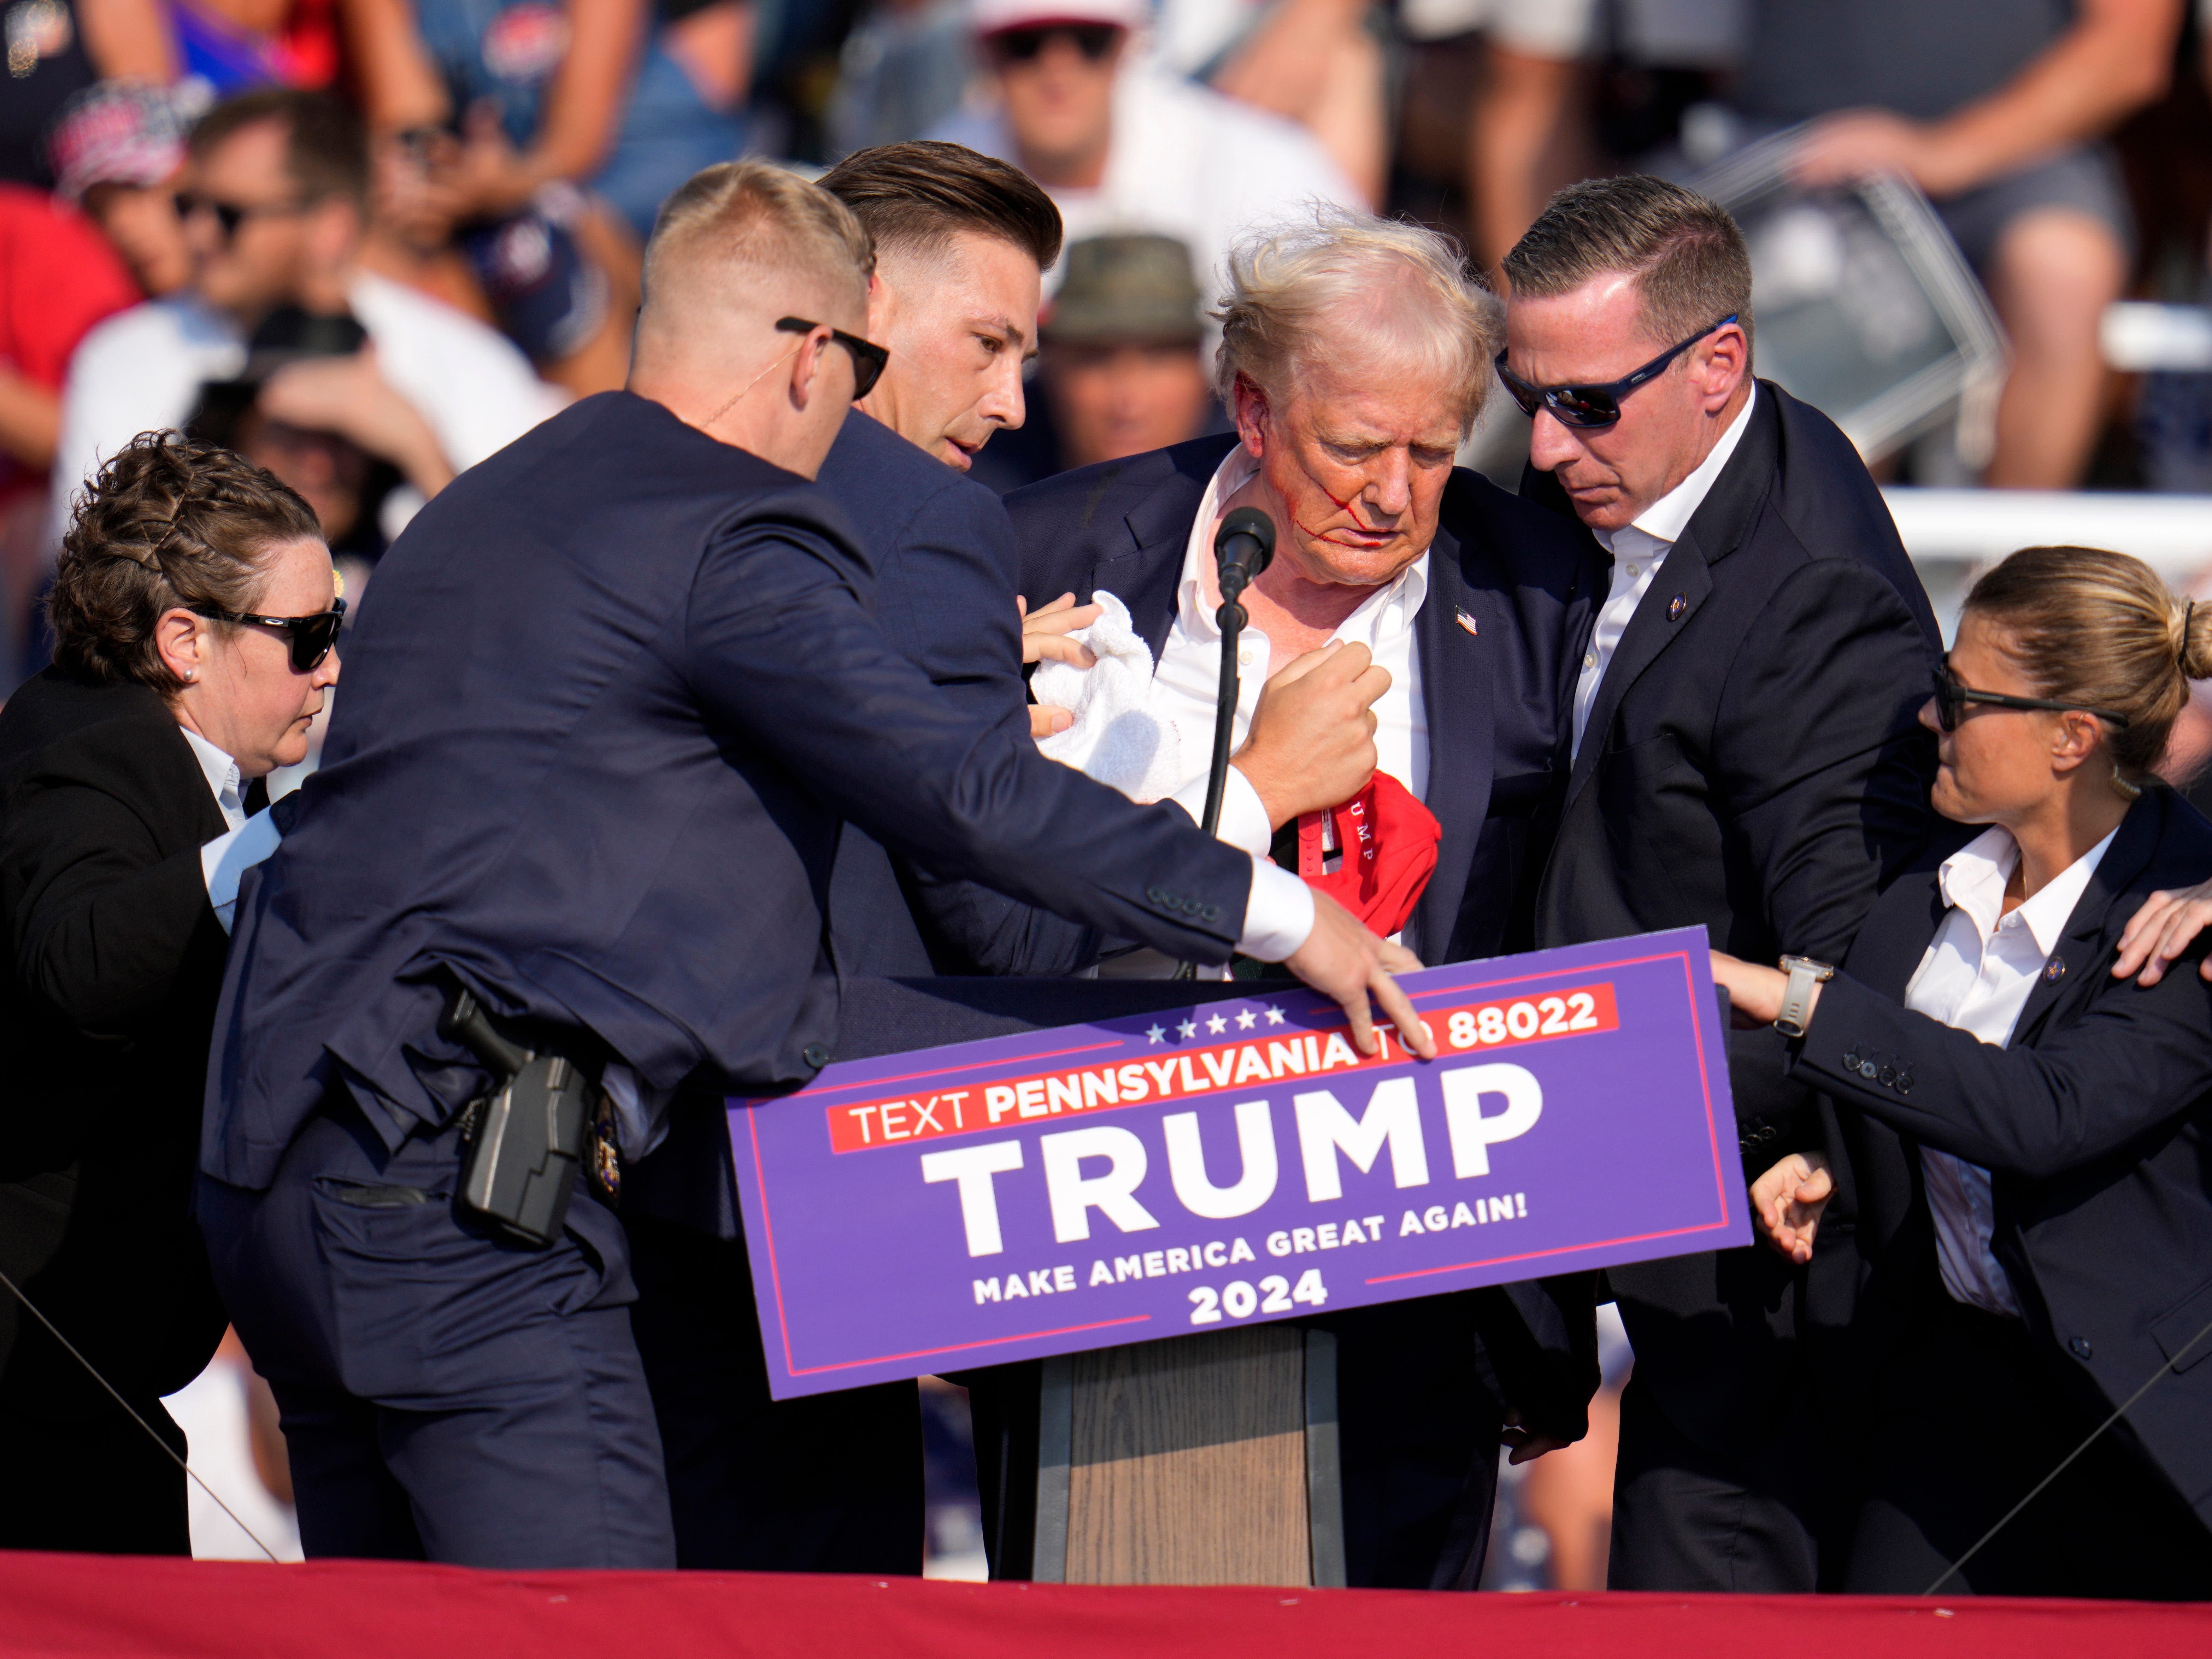 Witness shares account of seeing a spectator killed at Trump rally: 'His family members were on the bleachers with him'